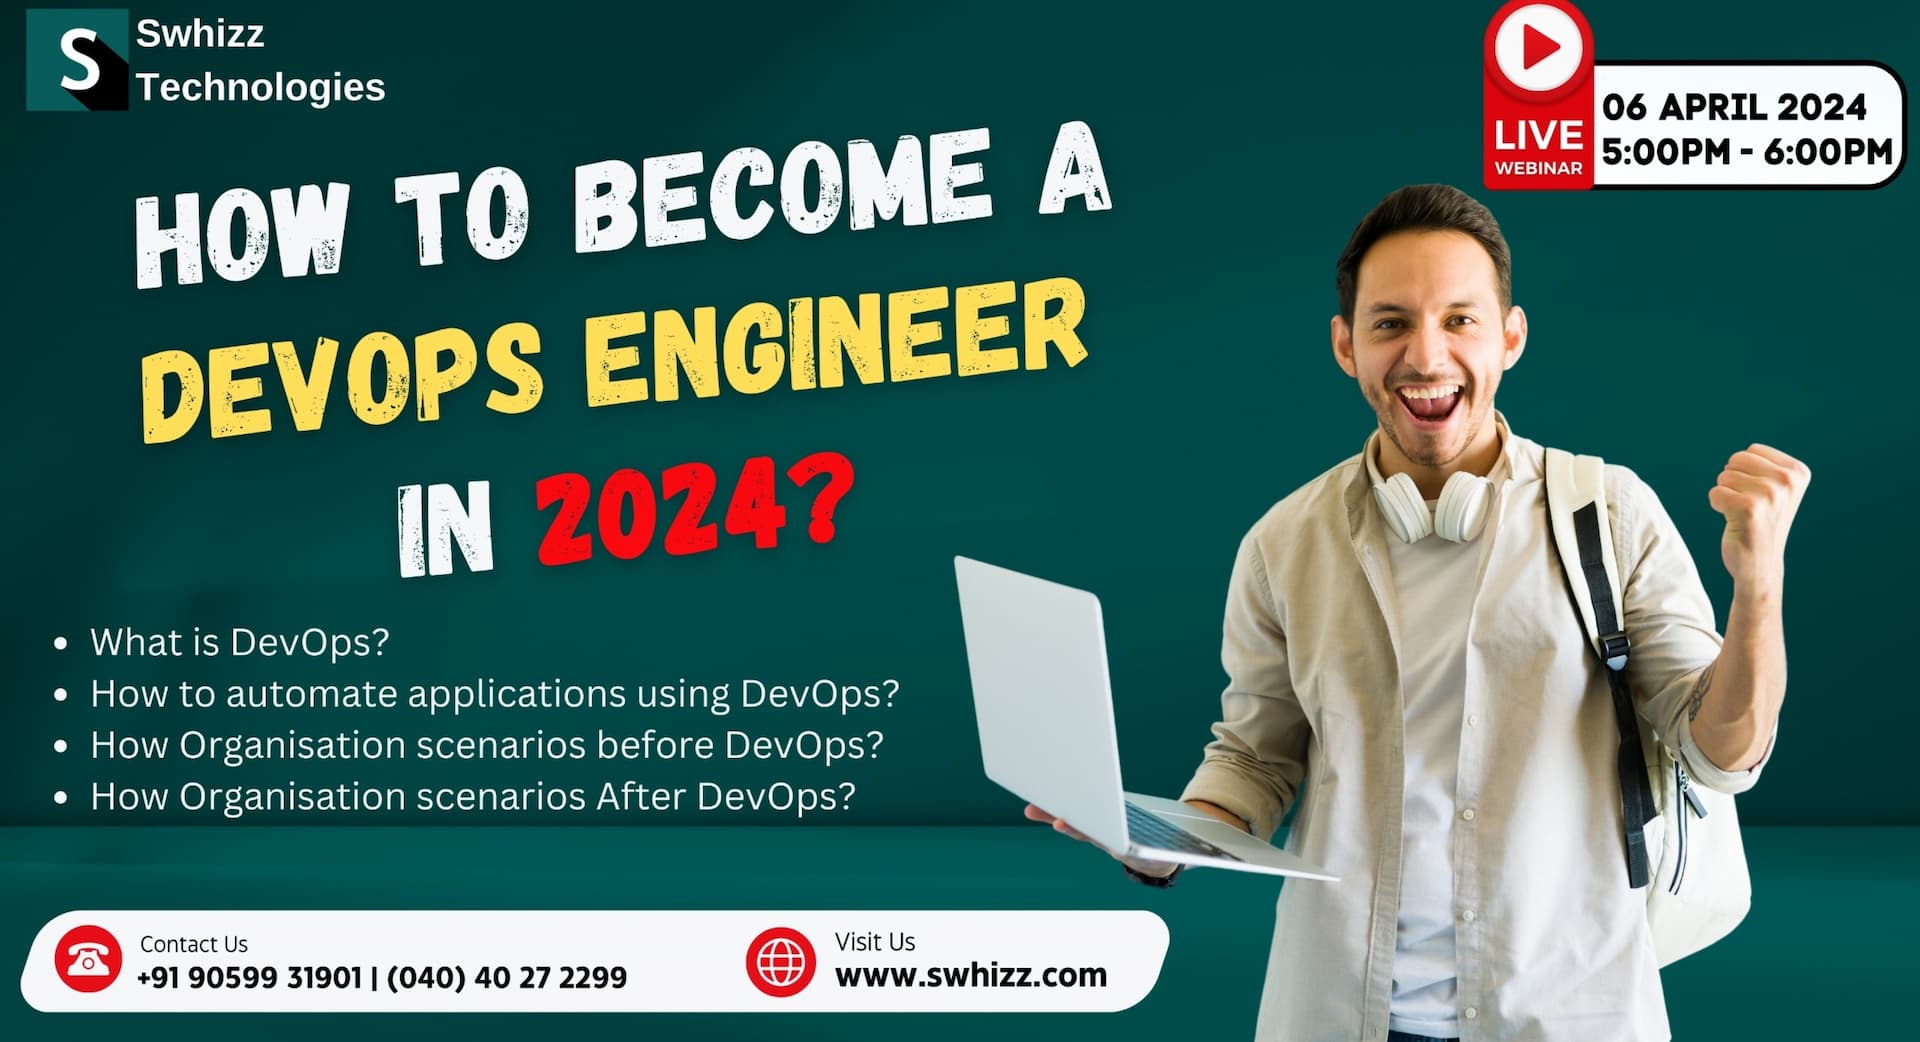 WEBNARS HOW TO BECOME A DEVOPS ENGINEER IN 2024 ?